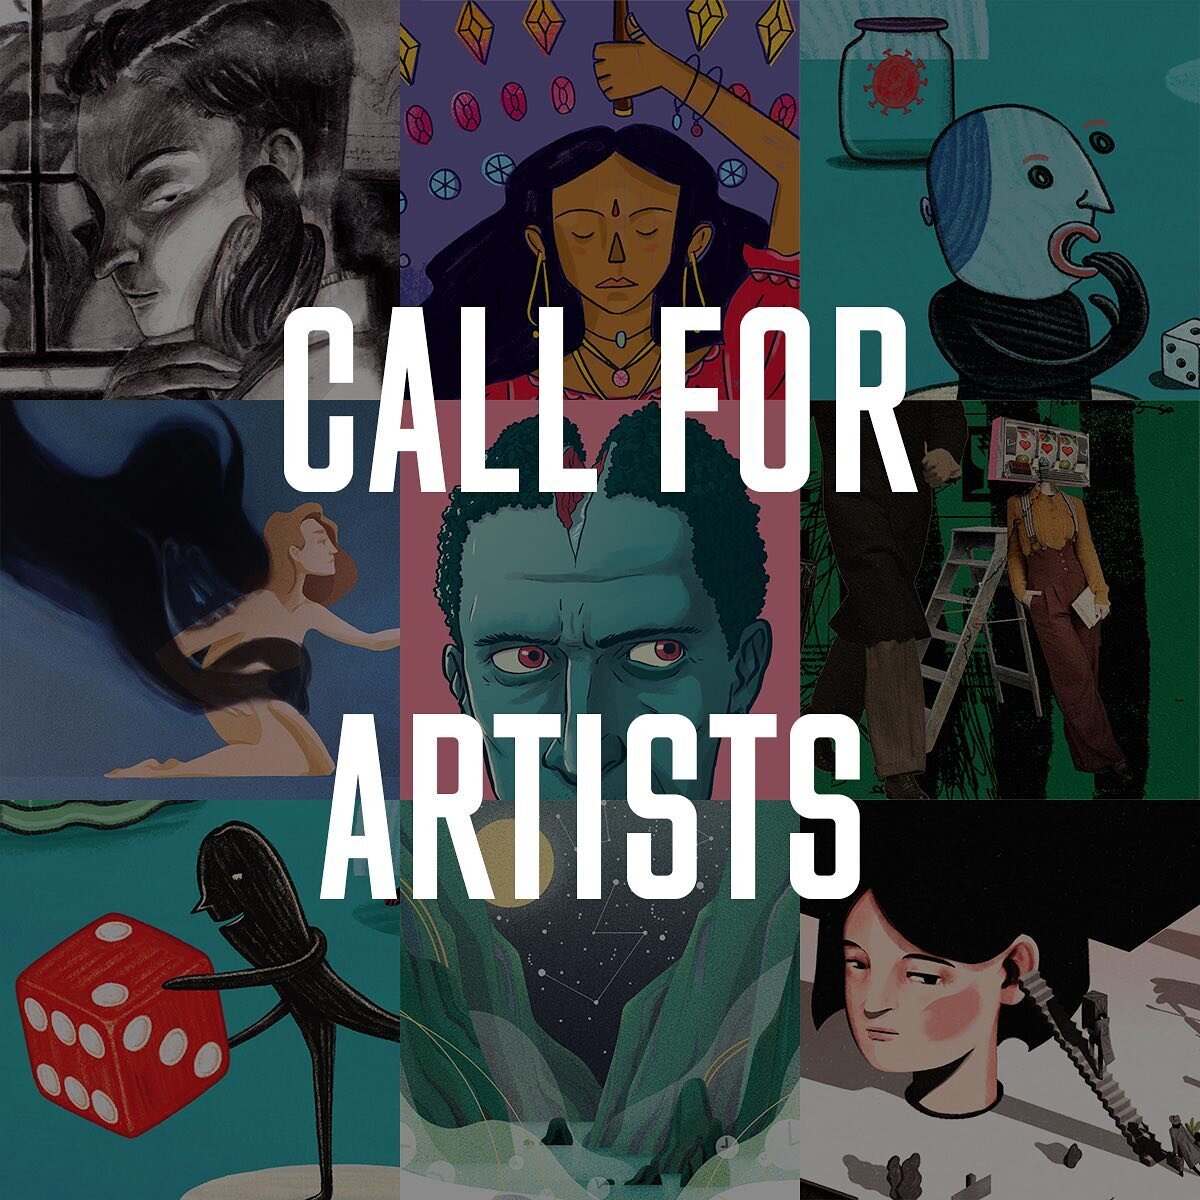 📣 We're looking for illustrators for our upcoming issue. Drop us an email with a link to your folio: info @ firewords.co.uk 🔥 #callforartists #callforillustrators